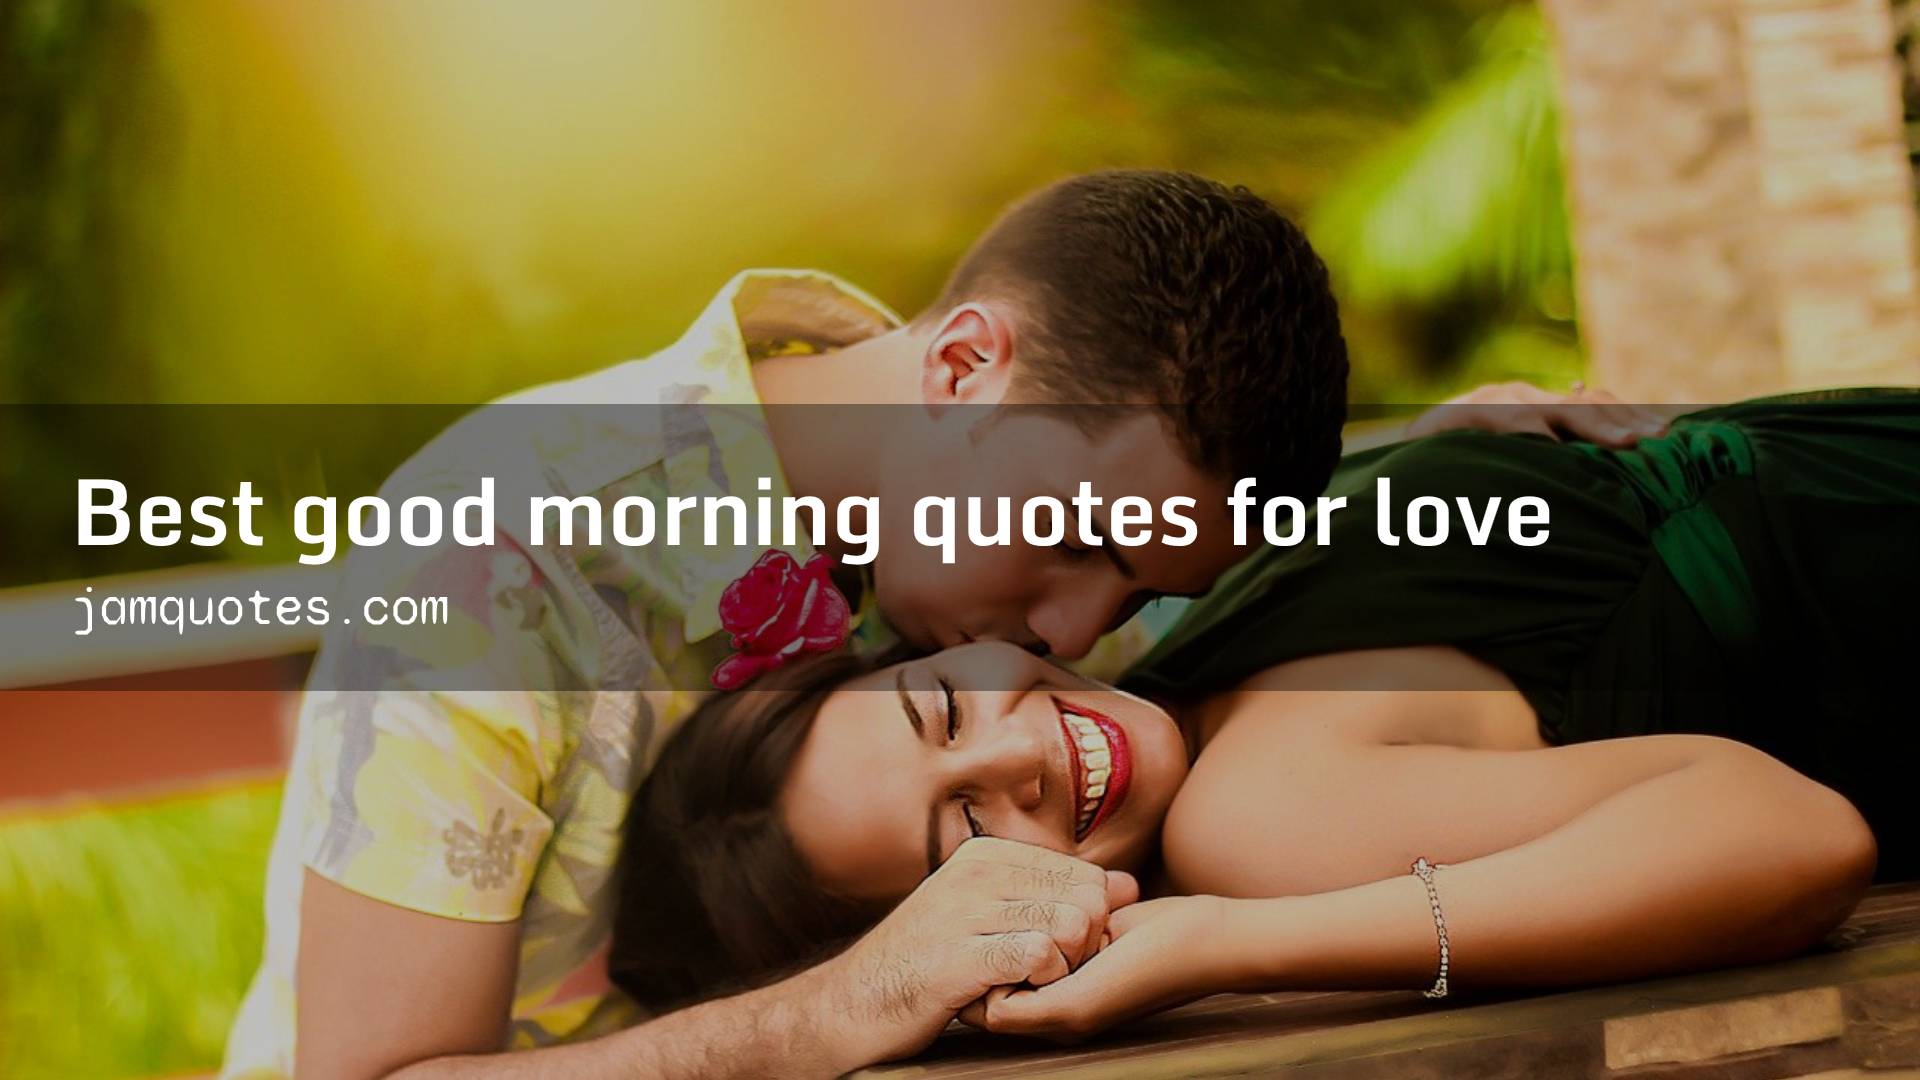 Best good morning quotes for love - JamQuotes